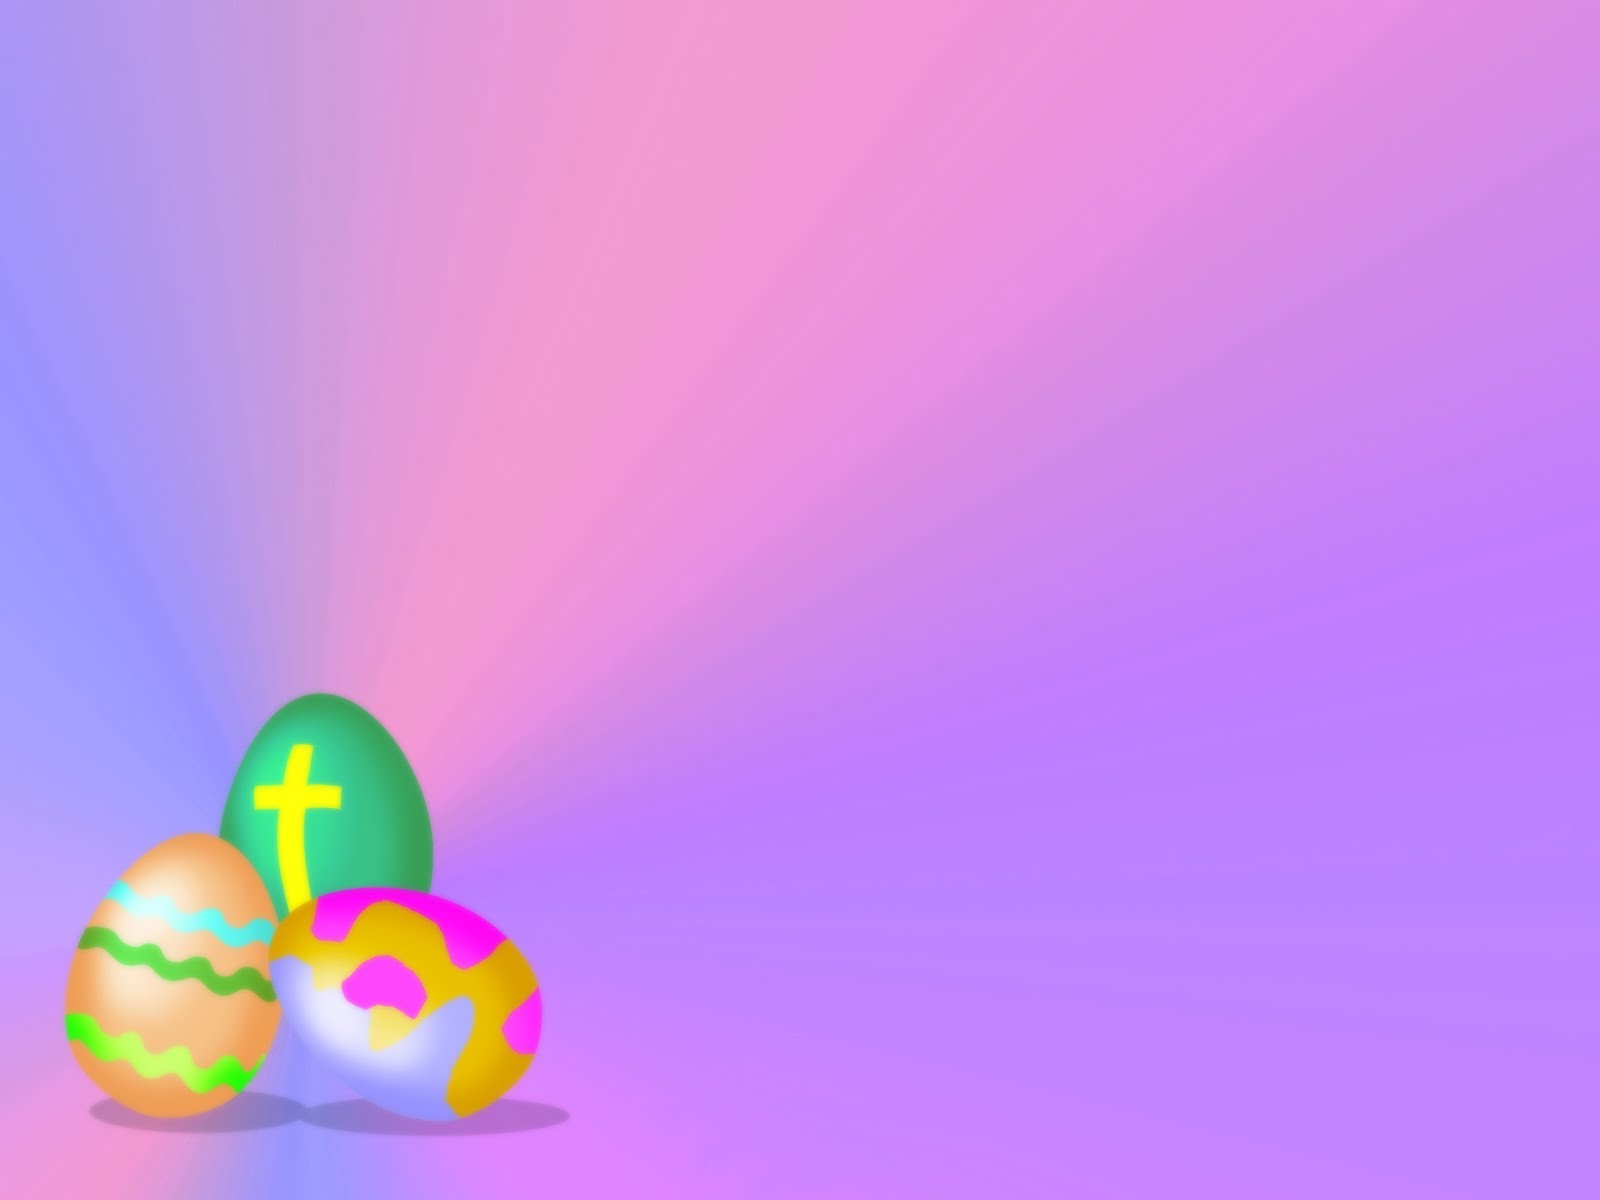 christian easter clipart free download - photo #41